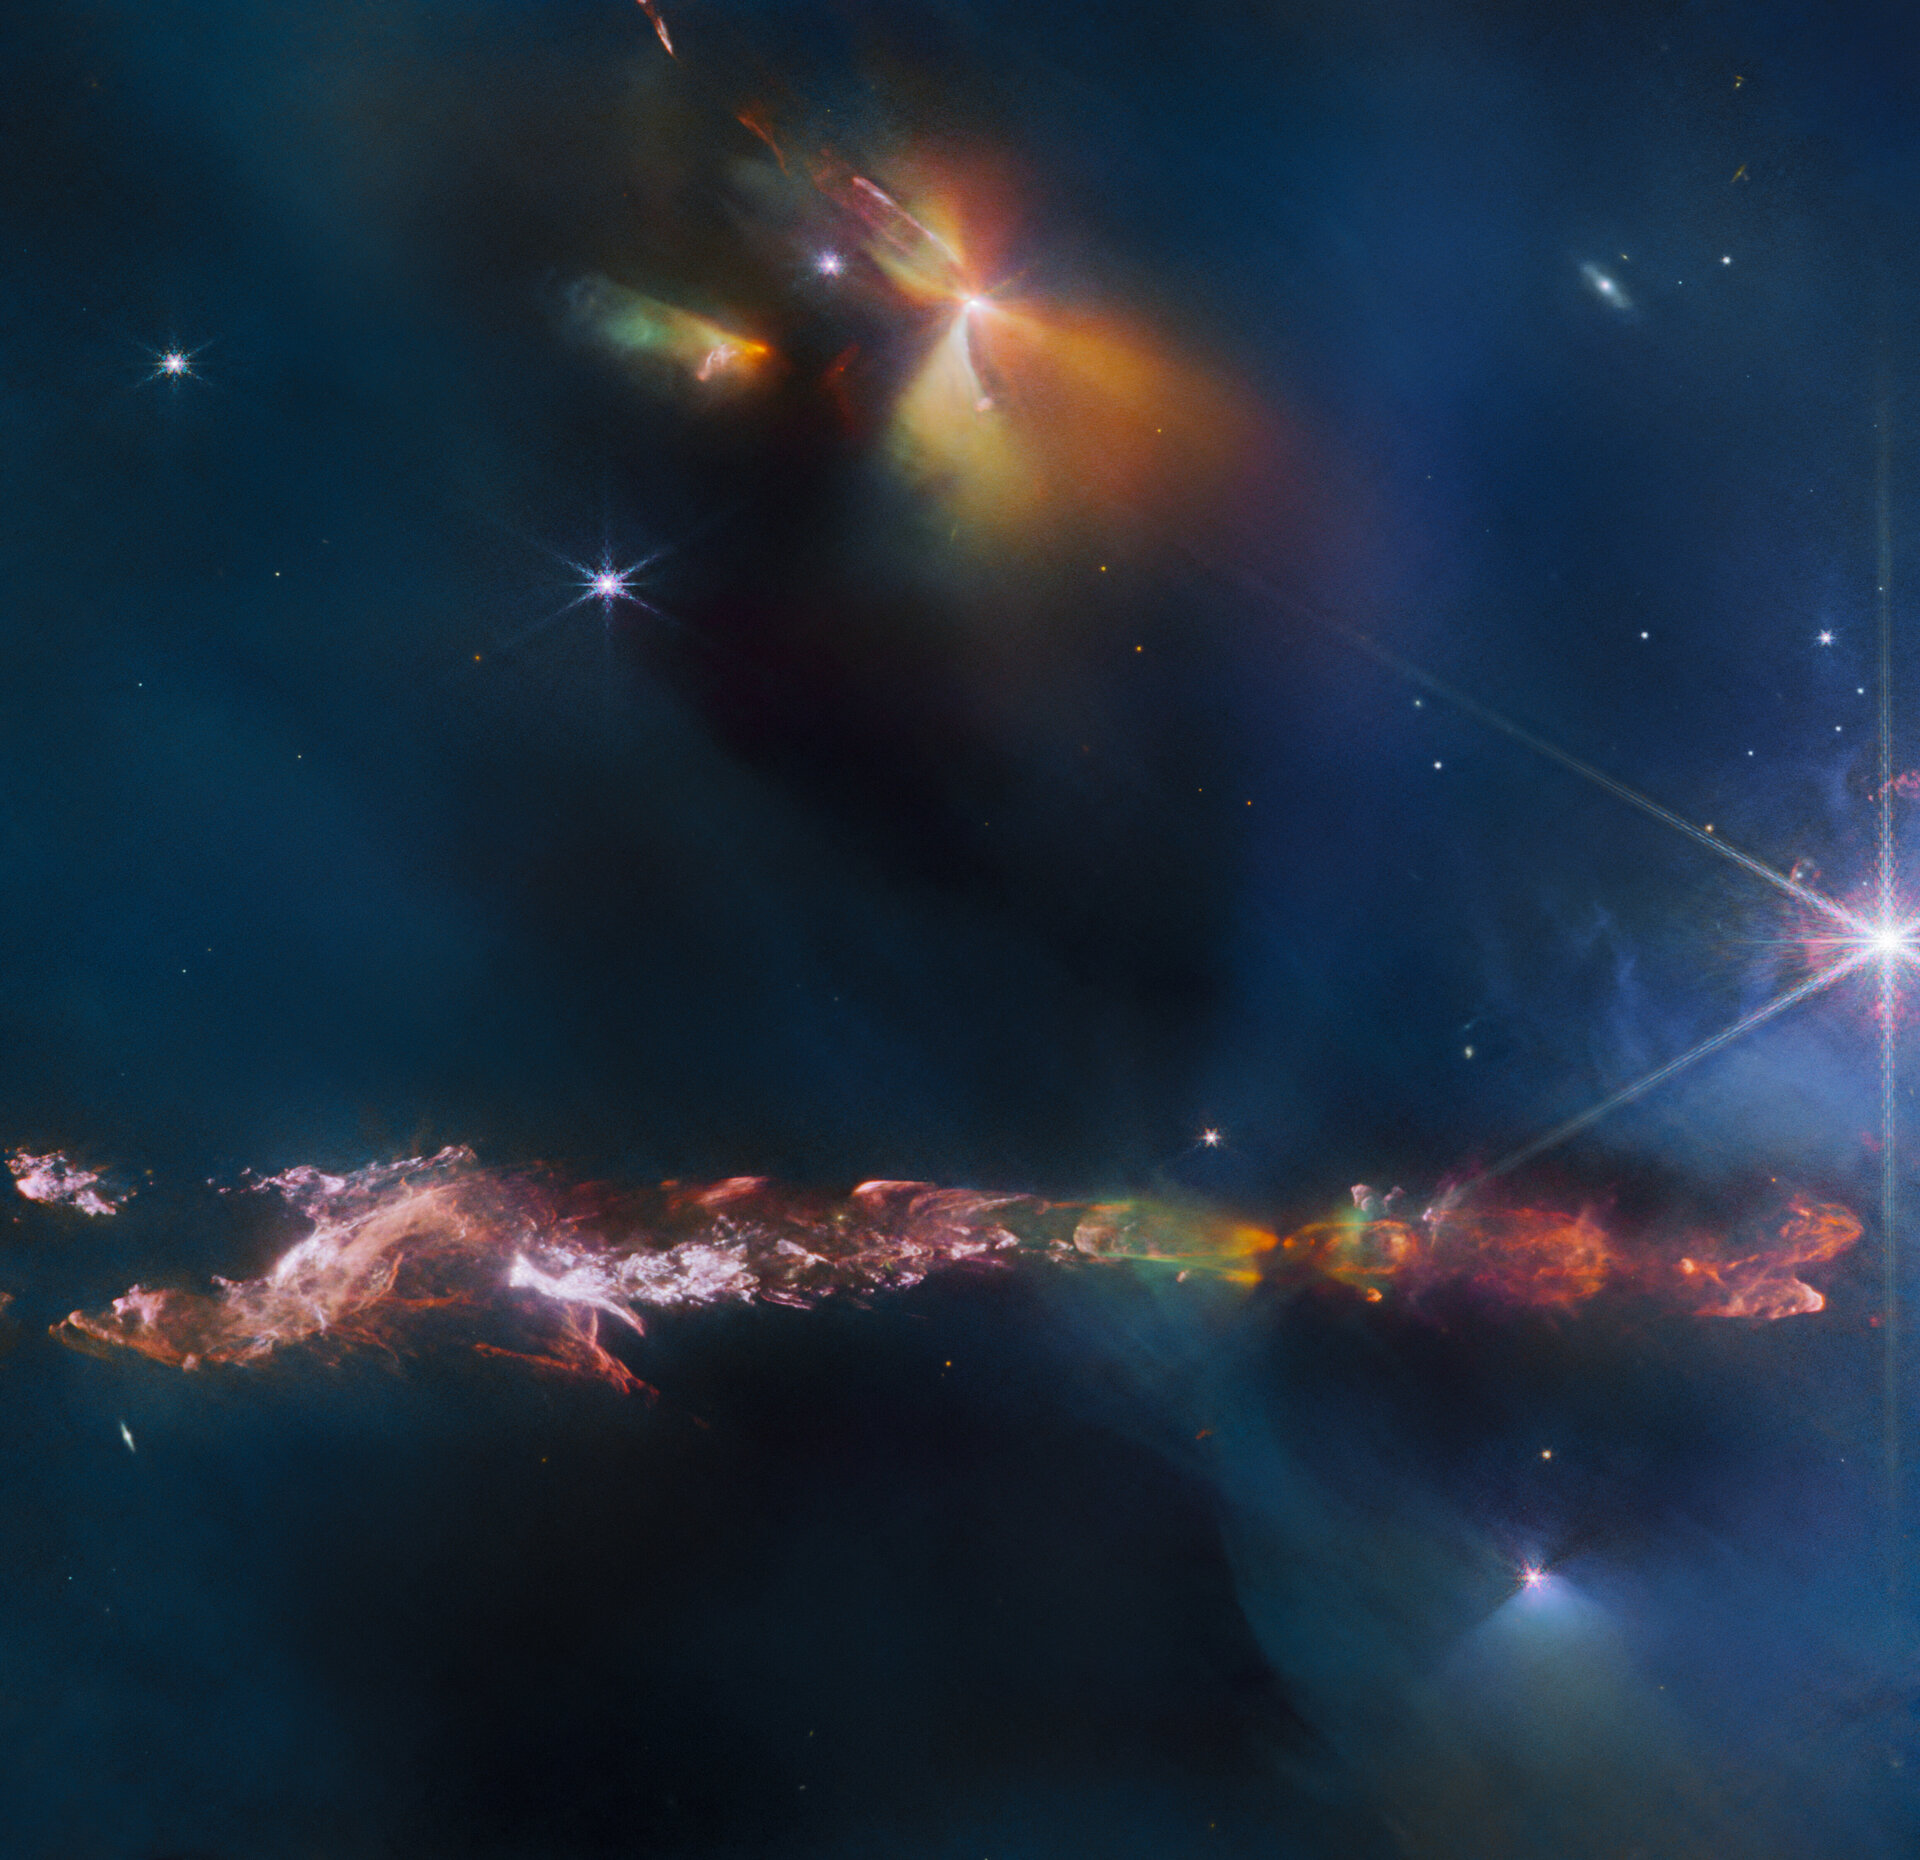 The NASA/ESA/CSA James Webb Space Telescope reveals intricate details of the Herbig Haro object 797 (HH 797). Herbig-Haro objects are luminous regions surrounding newborn stars (known as protostars), and are formed when stellar winds or jets of gas spewing from these newborn stars form shockwaves colliding with nearby gas and dust at high speeds. HH 797, which dominates the lower half of this image, is located close to the young open star cluster IC 348, which is located near the eastern edge of the Perseus dark cloud complex. The bright infrared objects in the upper portion of the image are thought to host two further protostars. This image was captured with Webb’s Near-InfraRed Camera (NIRCam).